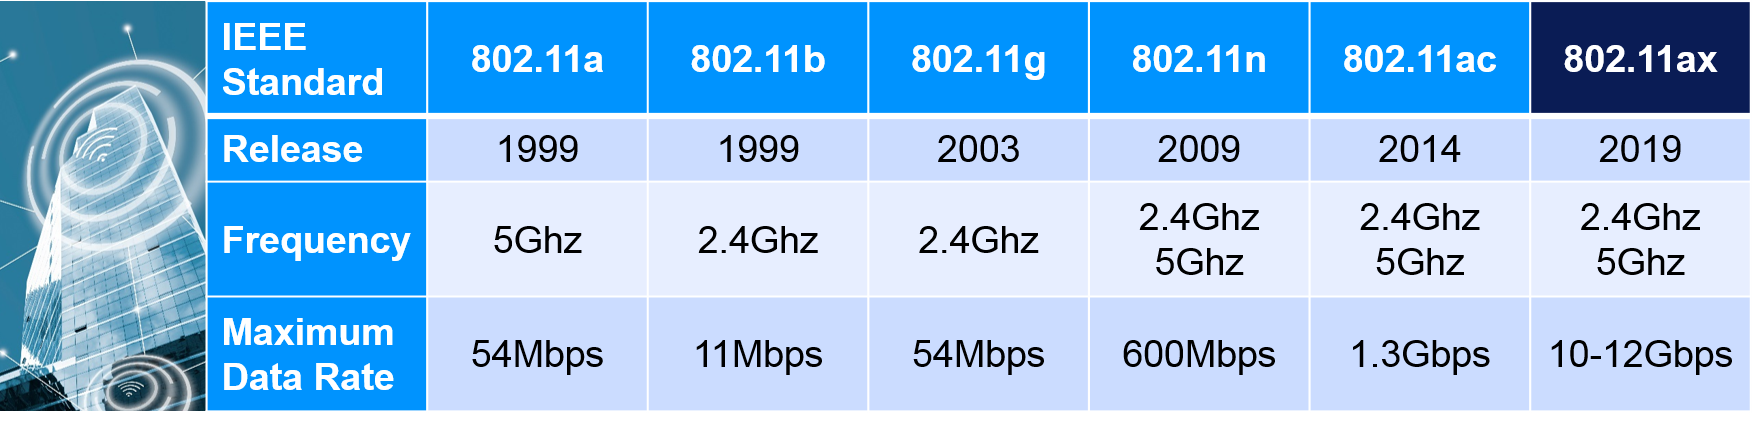 Wi-Fi evolution overview by release date, frequency and maximum data rate